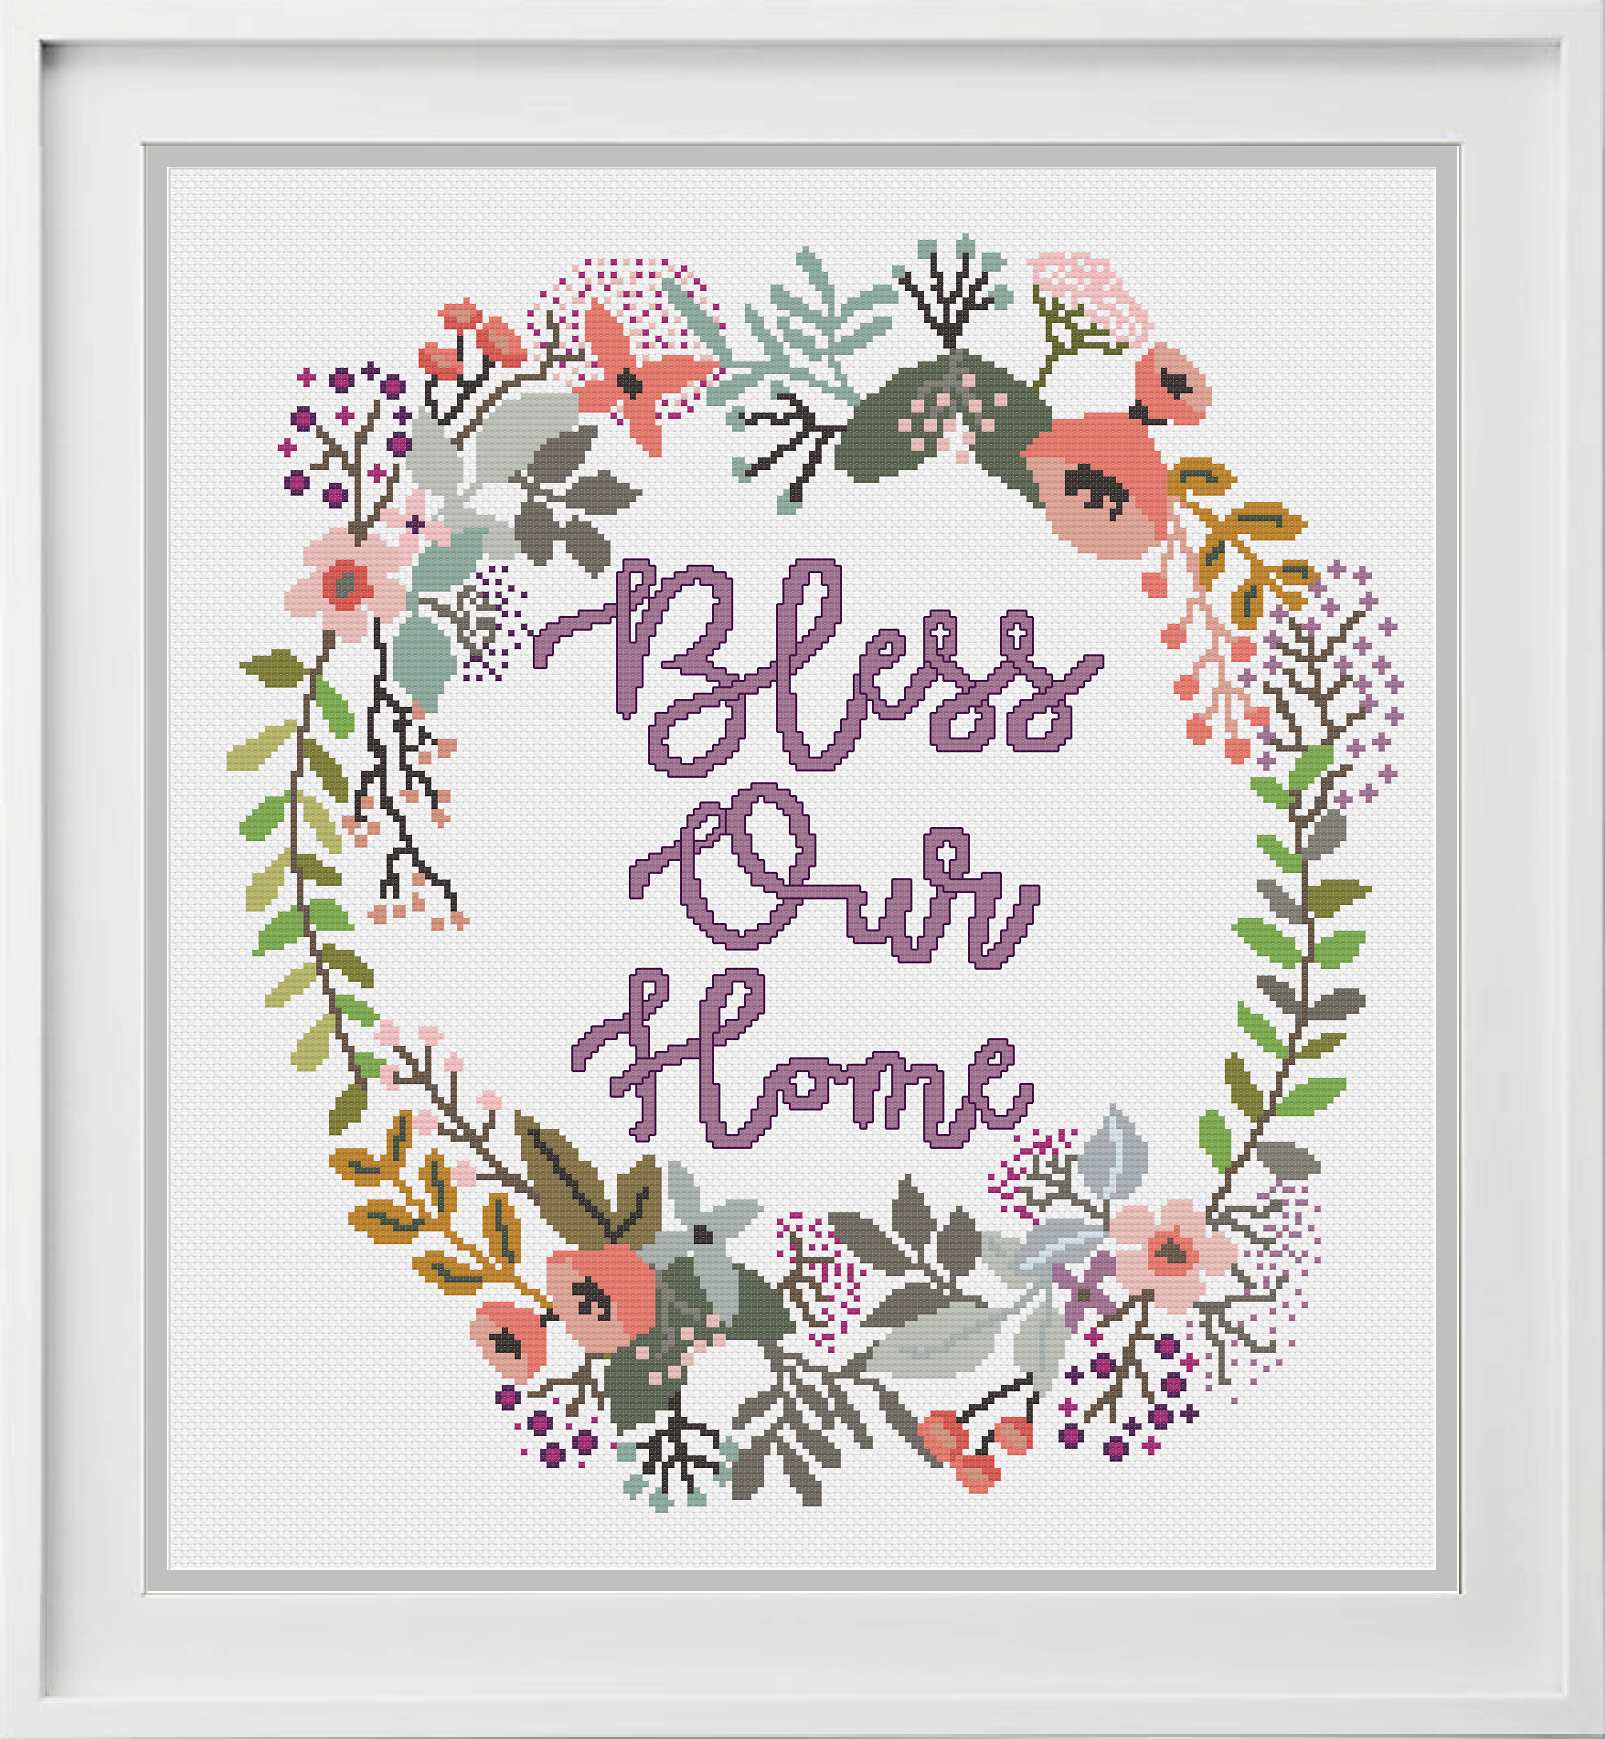 Bless Our Home - Blackwork Patterns & Cross Stitch by Peppermint Purple